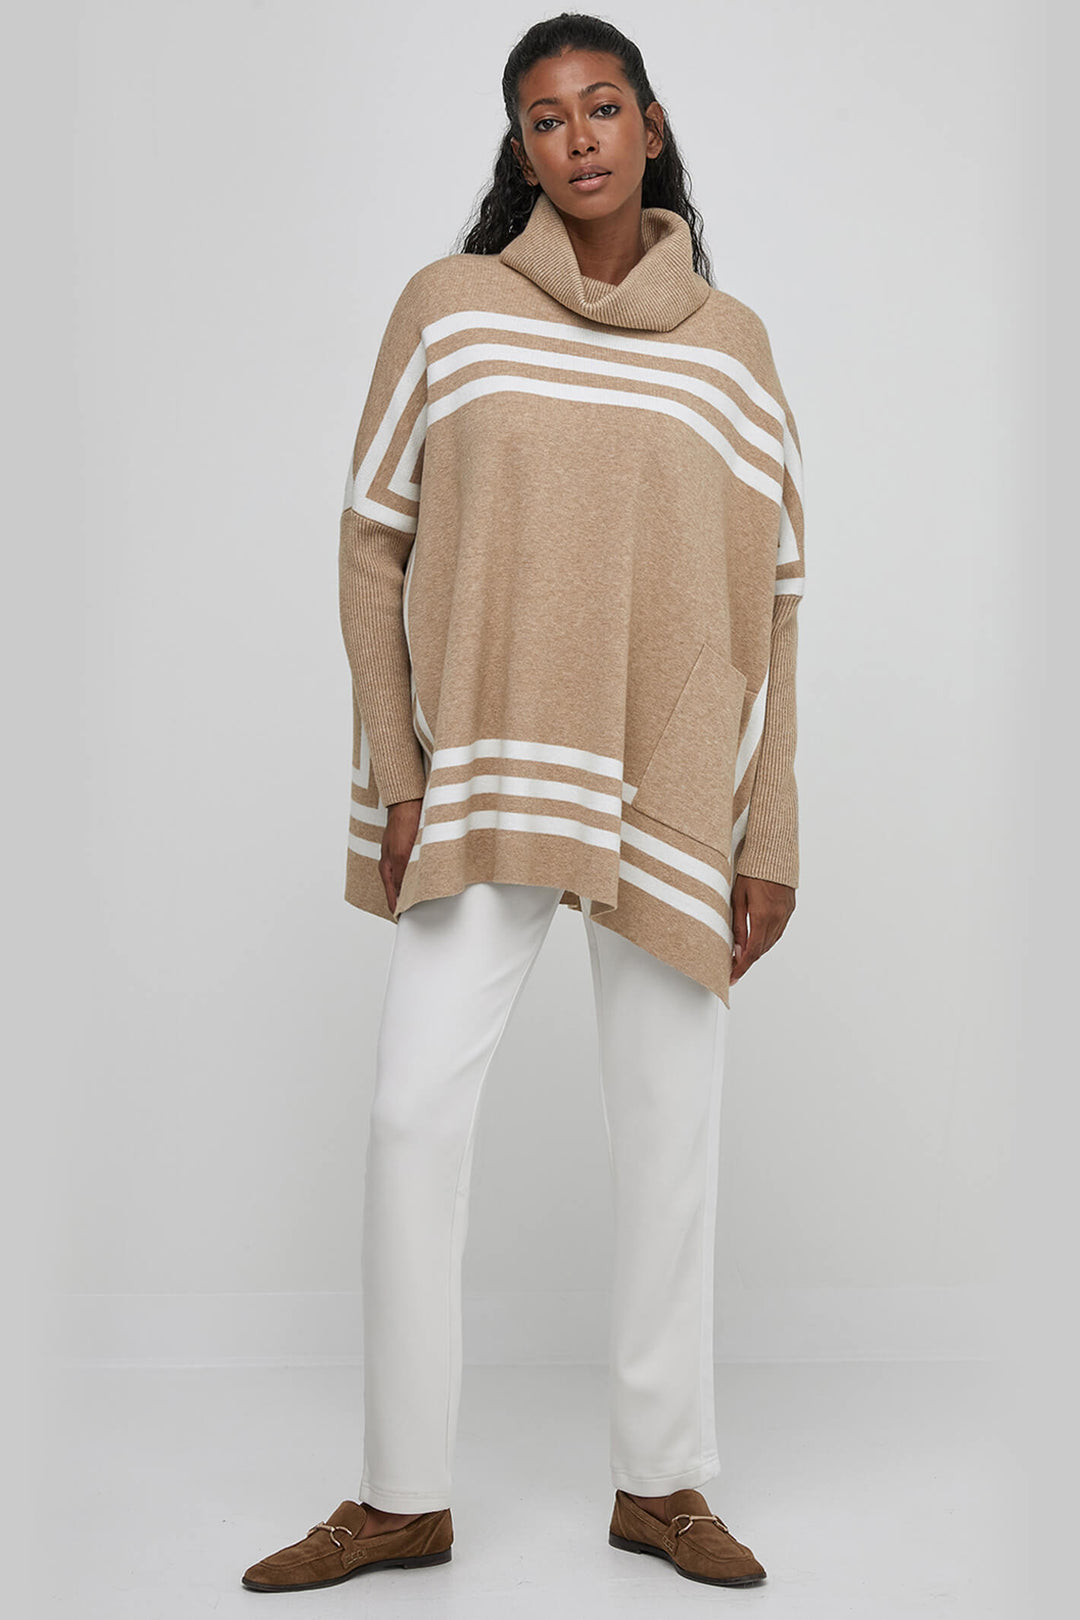 Uchuu CF23-908 Sand Milk Striped Cowl Neck Relaxed Fit Jumper